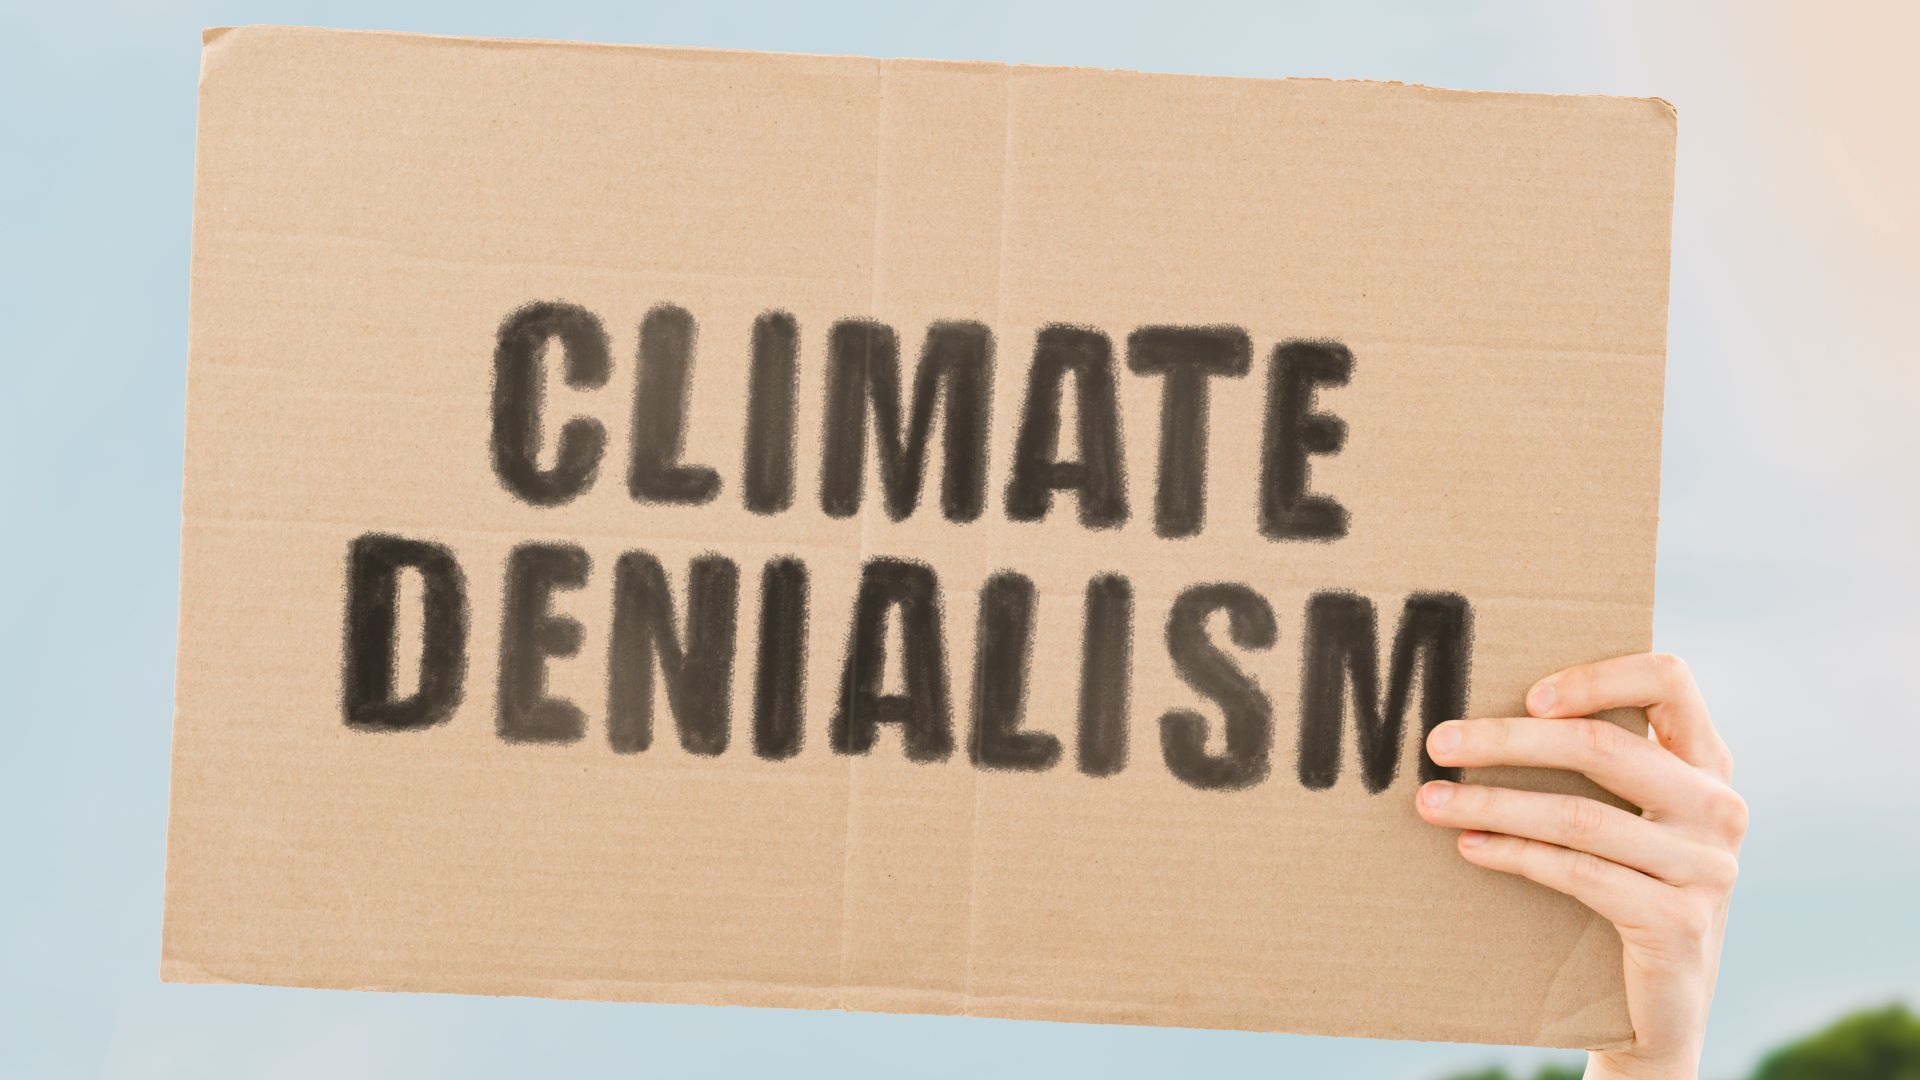 Image of someone holding sign reading "Climate Denialism"